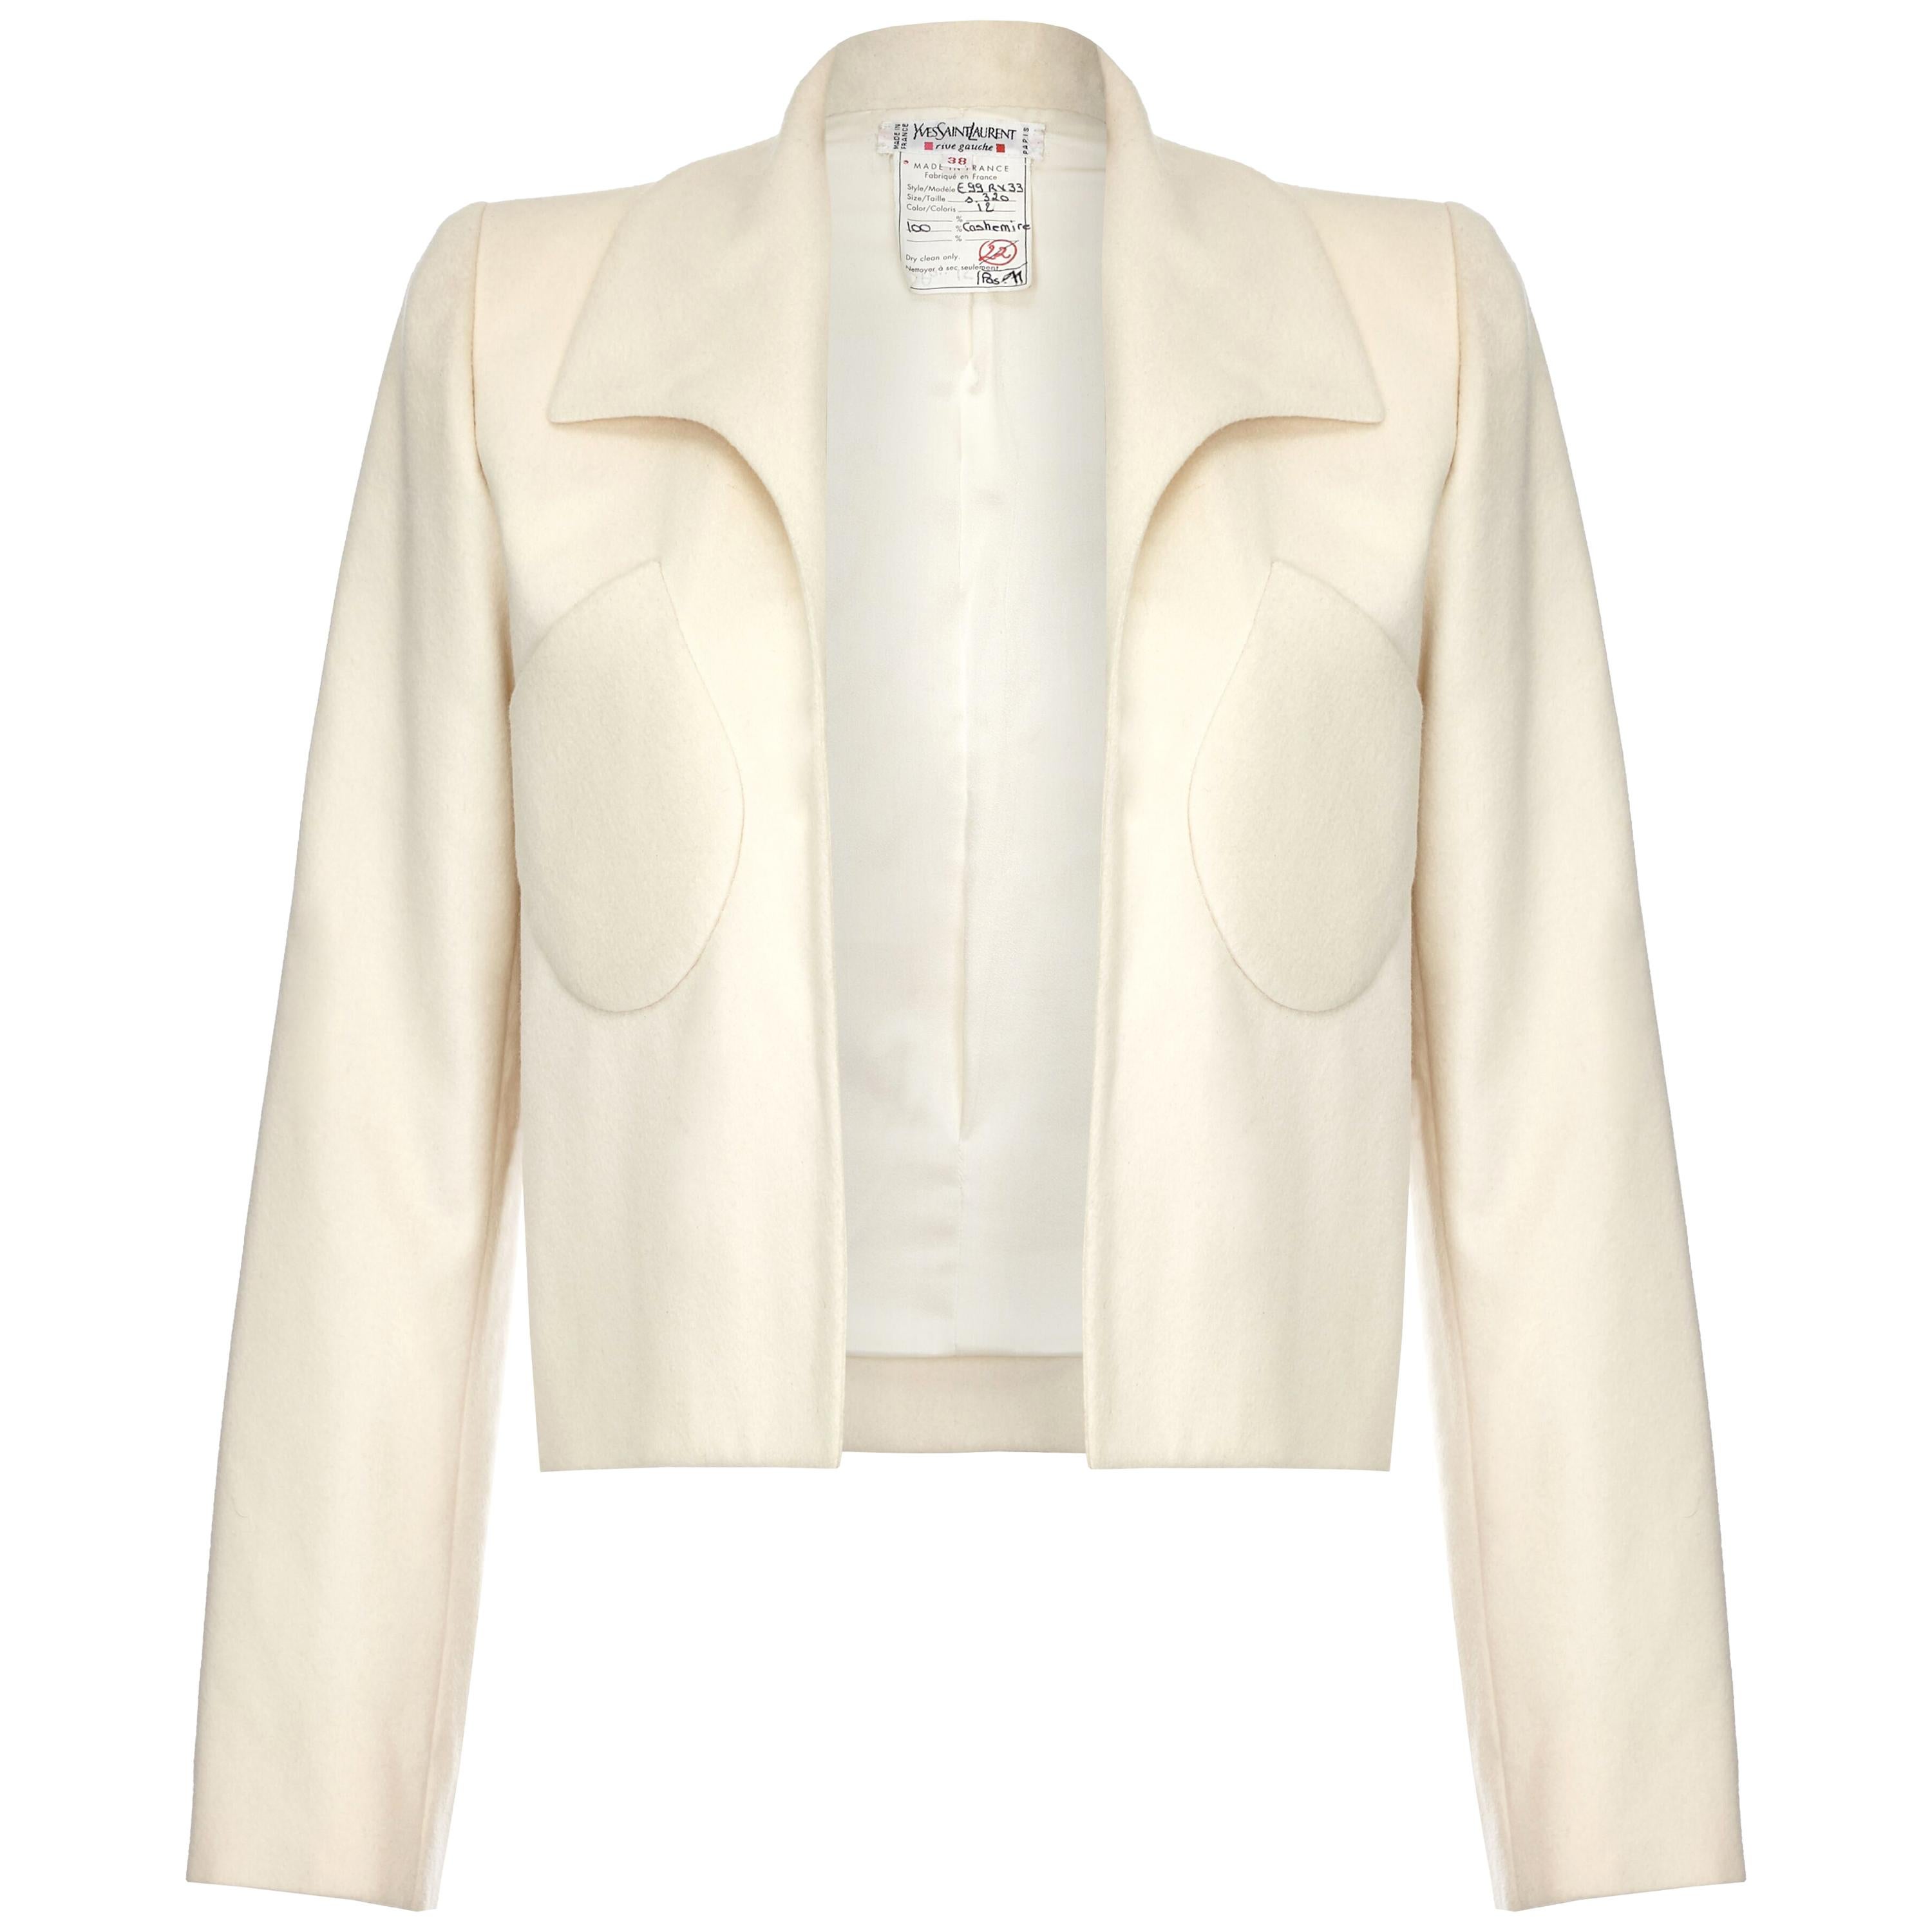 Tom Ford For Yves Saint Laurent Ivory Cashmere Structured Jacket Circa 1999